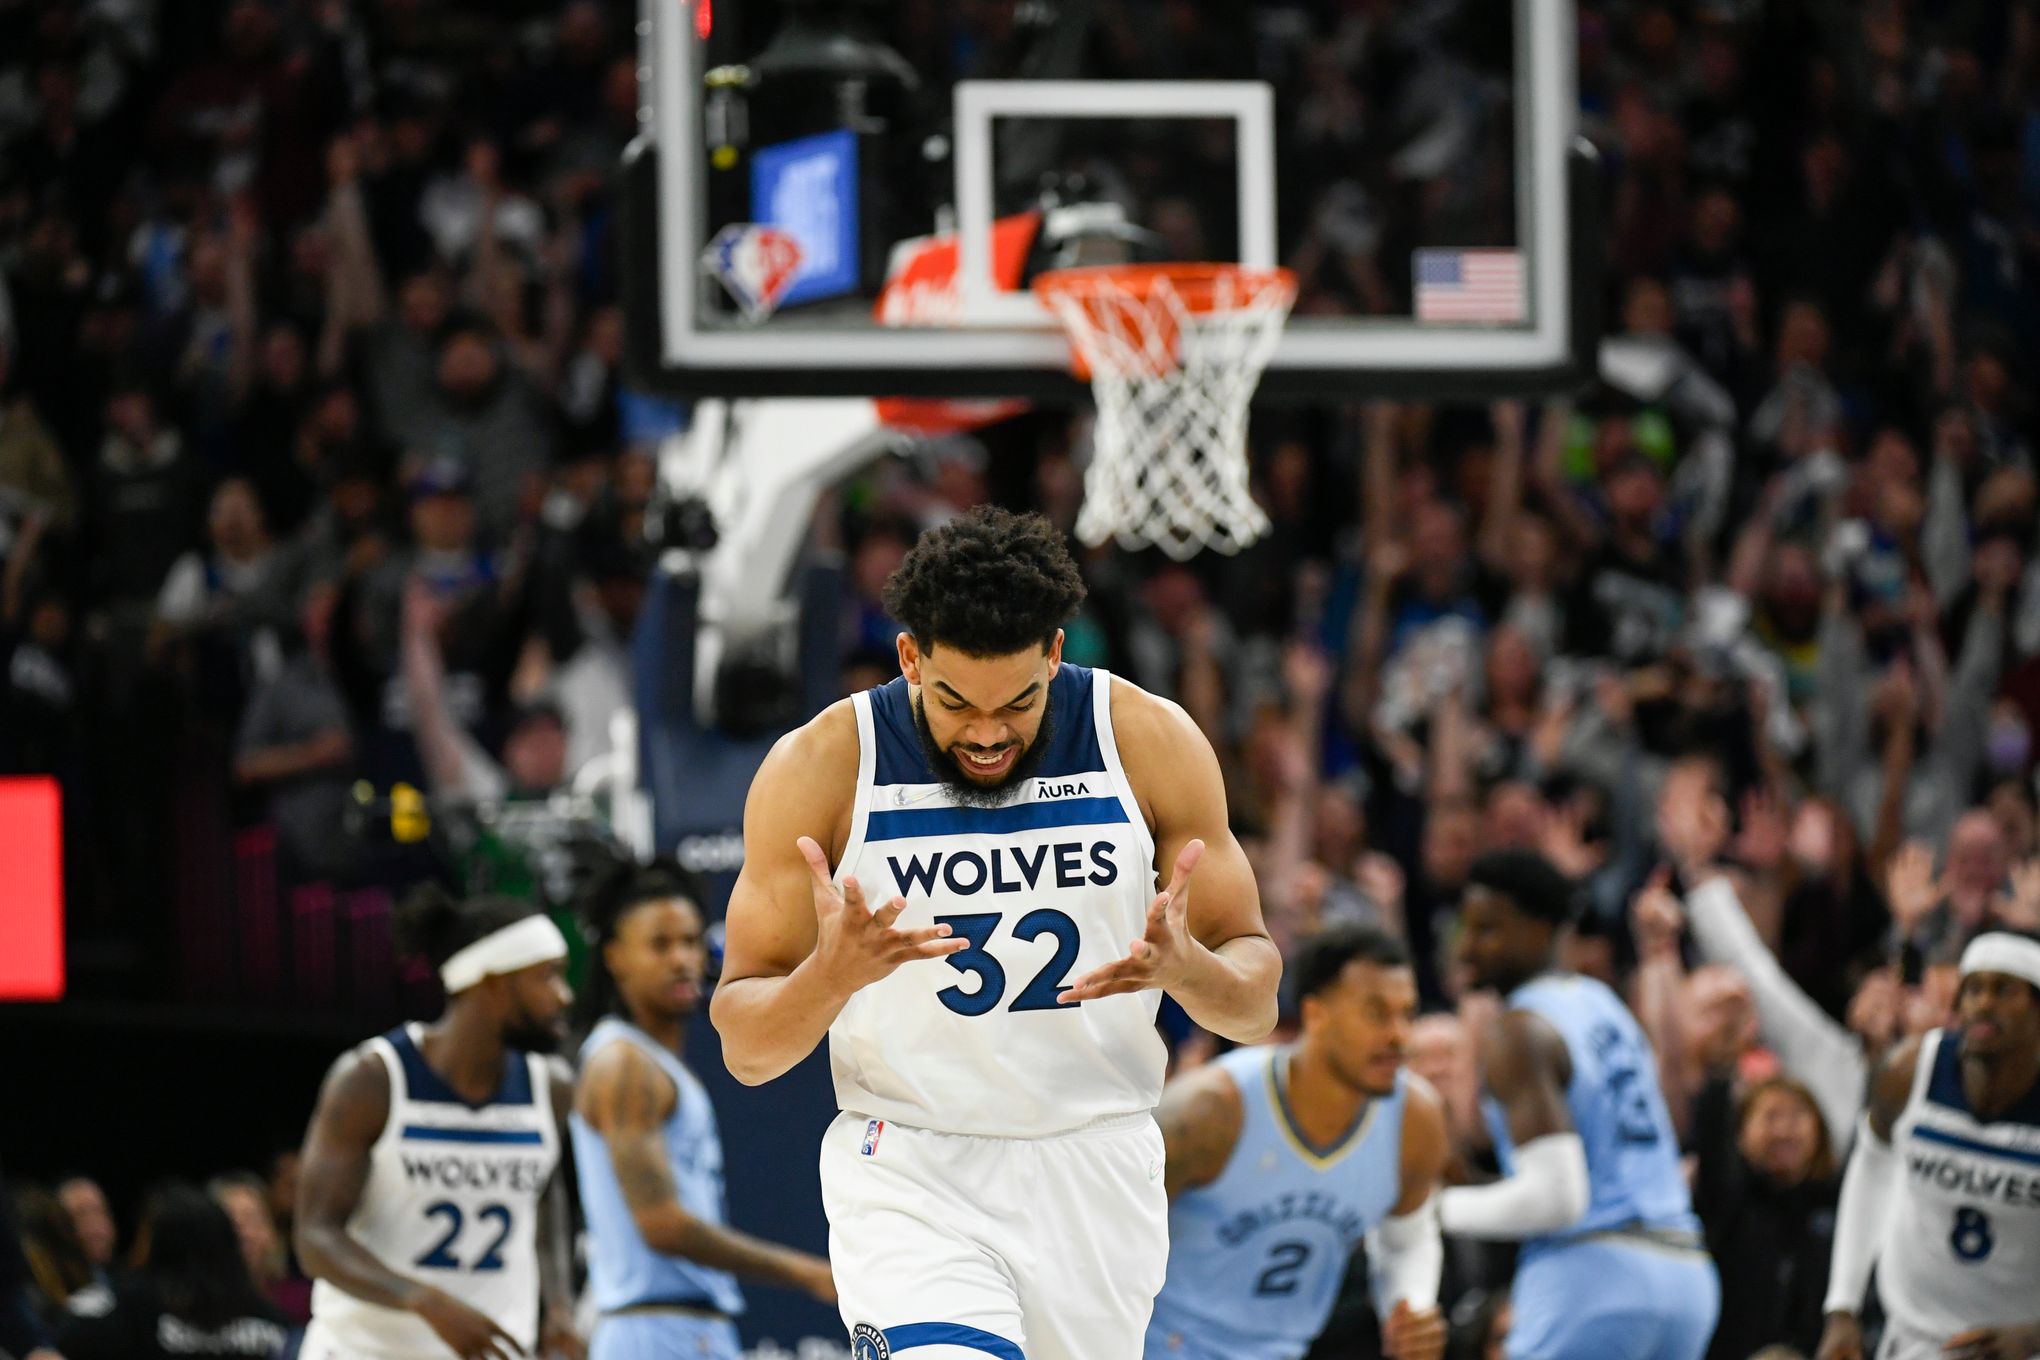 Towns T Wolves Rebound To Even Series With Grizzlies At 2 The Seattle Times